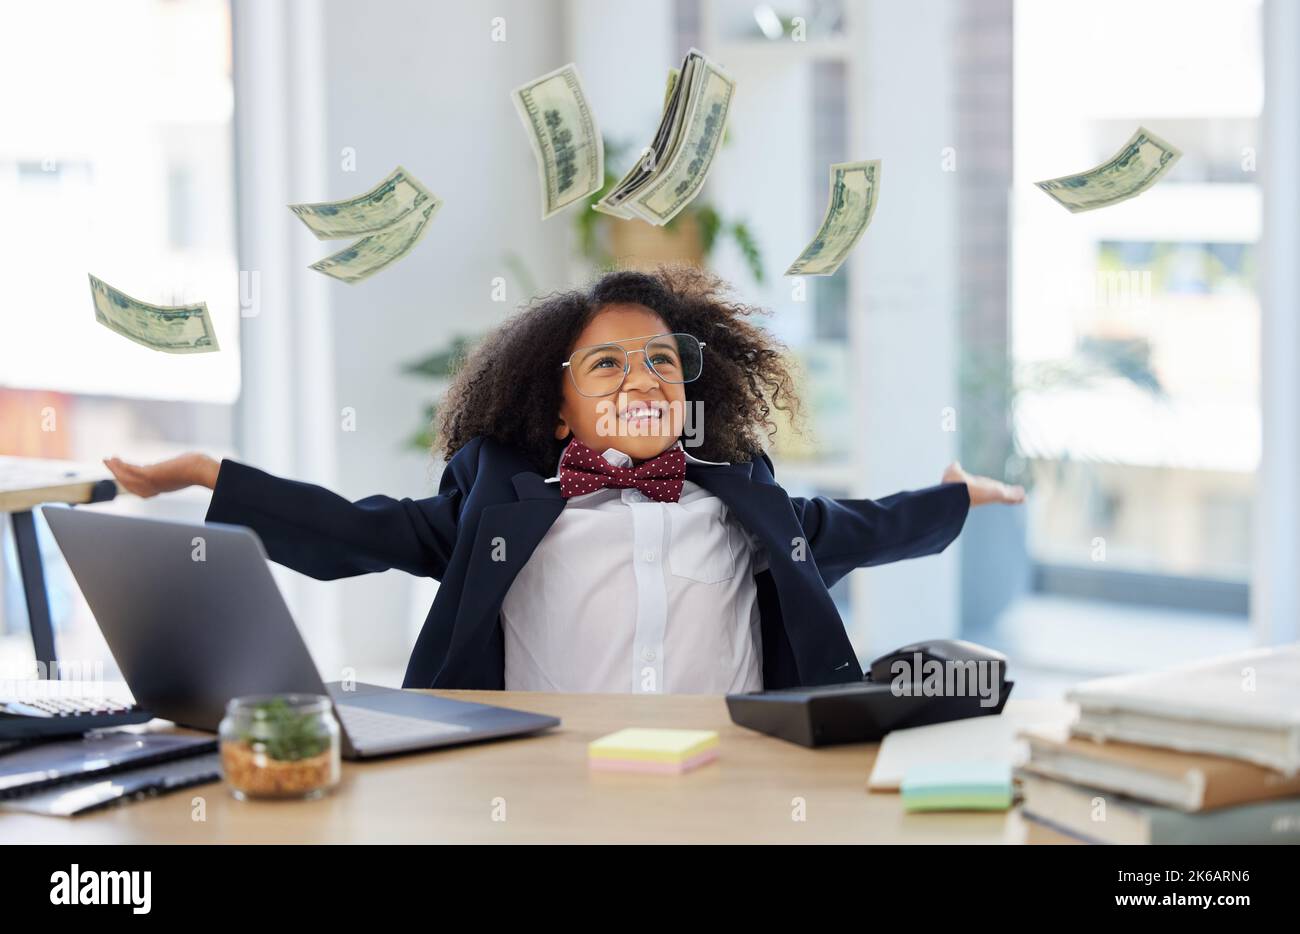 Money, money, money. an adorable little girl dressed as a businessperson sitting alone in an office and throwing money. Stock Photo